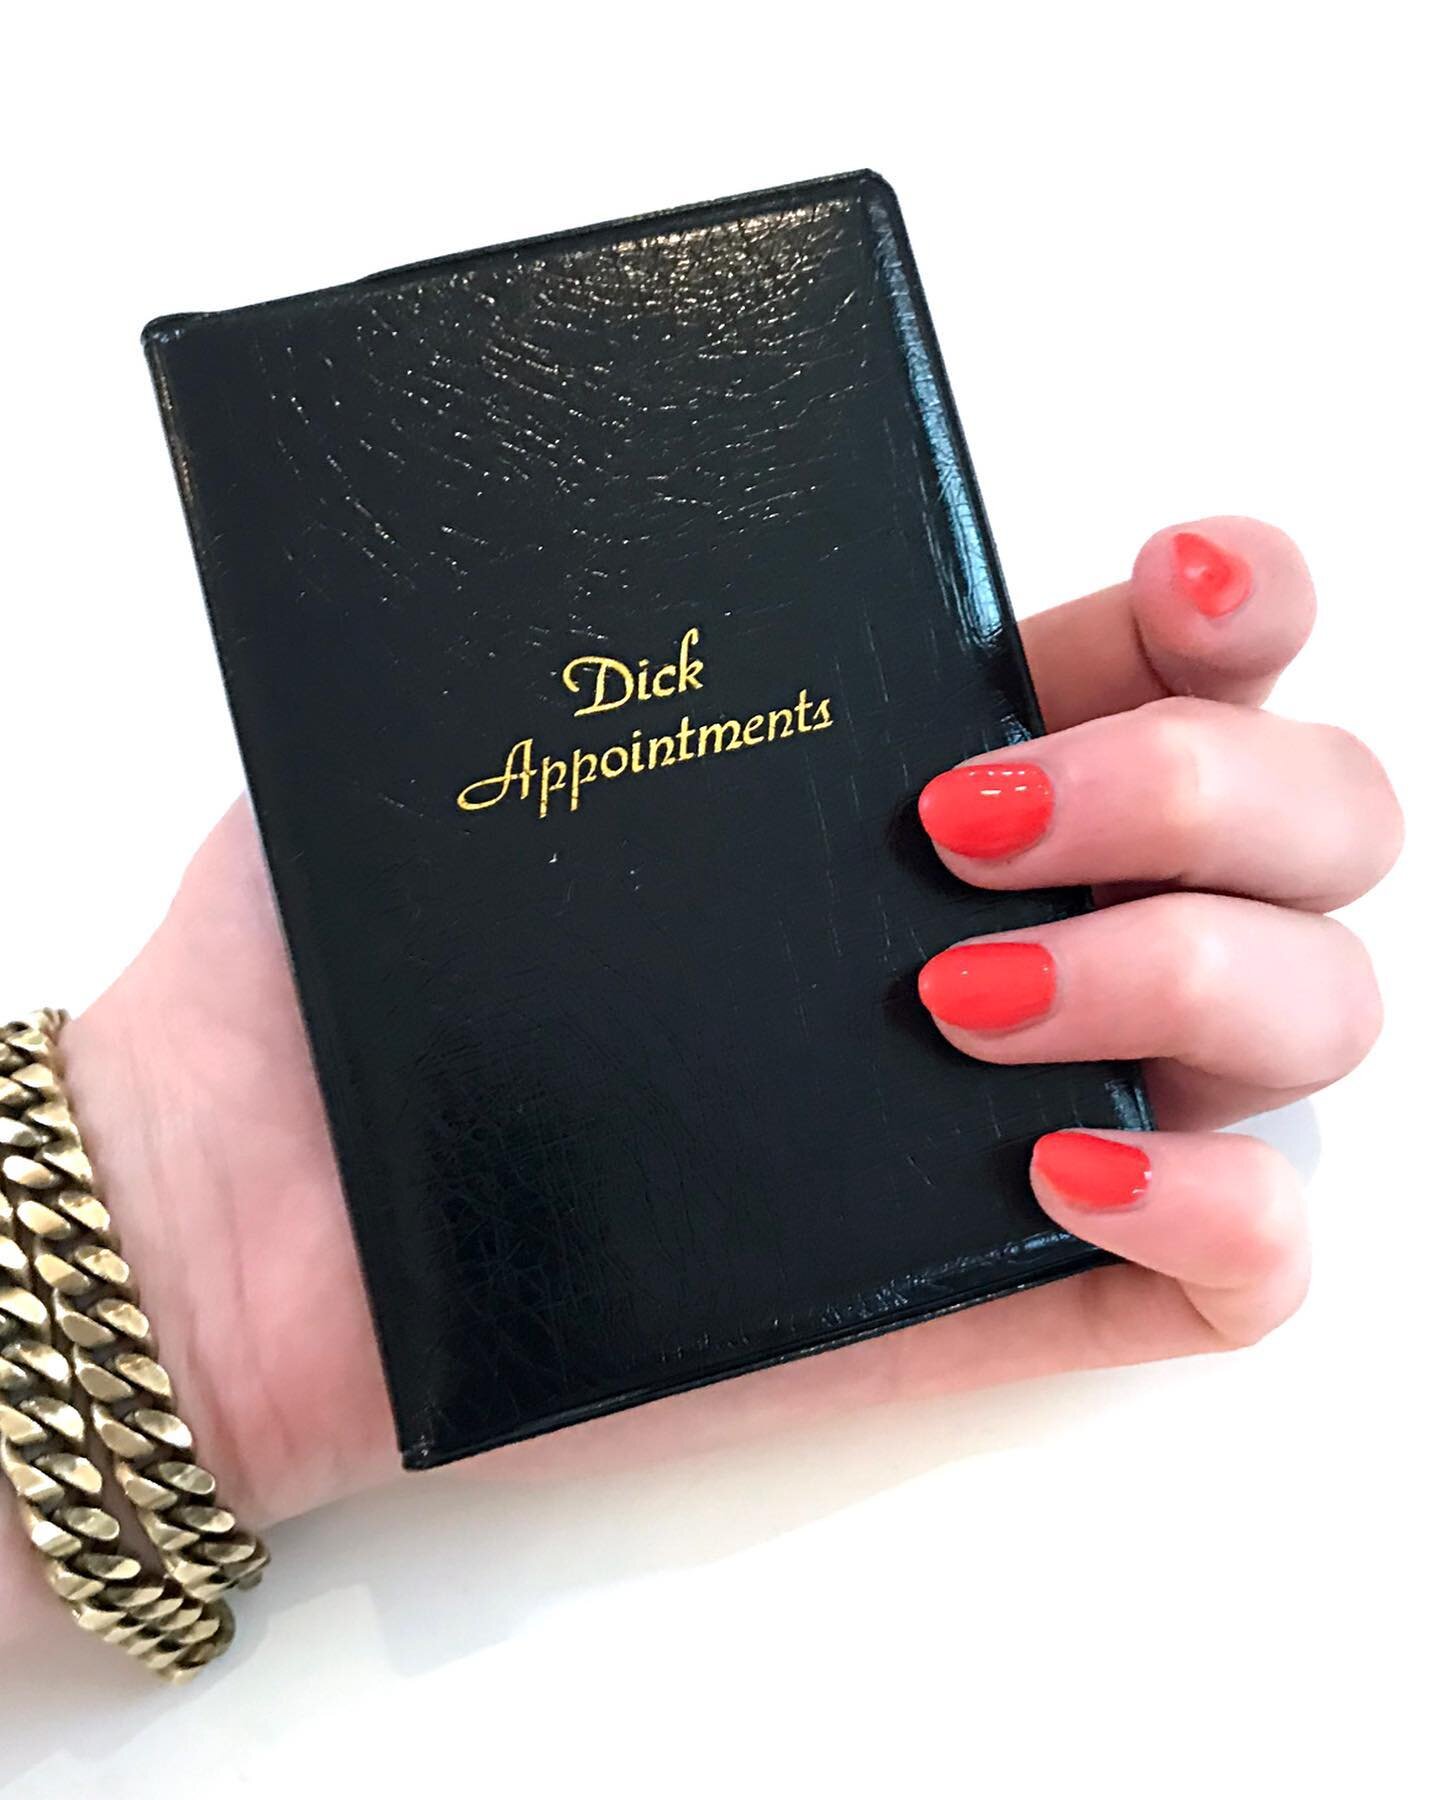 2023 Dick Appointment agendas are here! 🙌 Know anyone who needs their stocking stuffed this Christmas? 🤭🍑🎄 #dickappointments #dickappointmentagenda #2023agenda